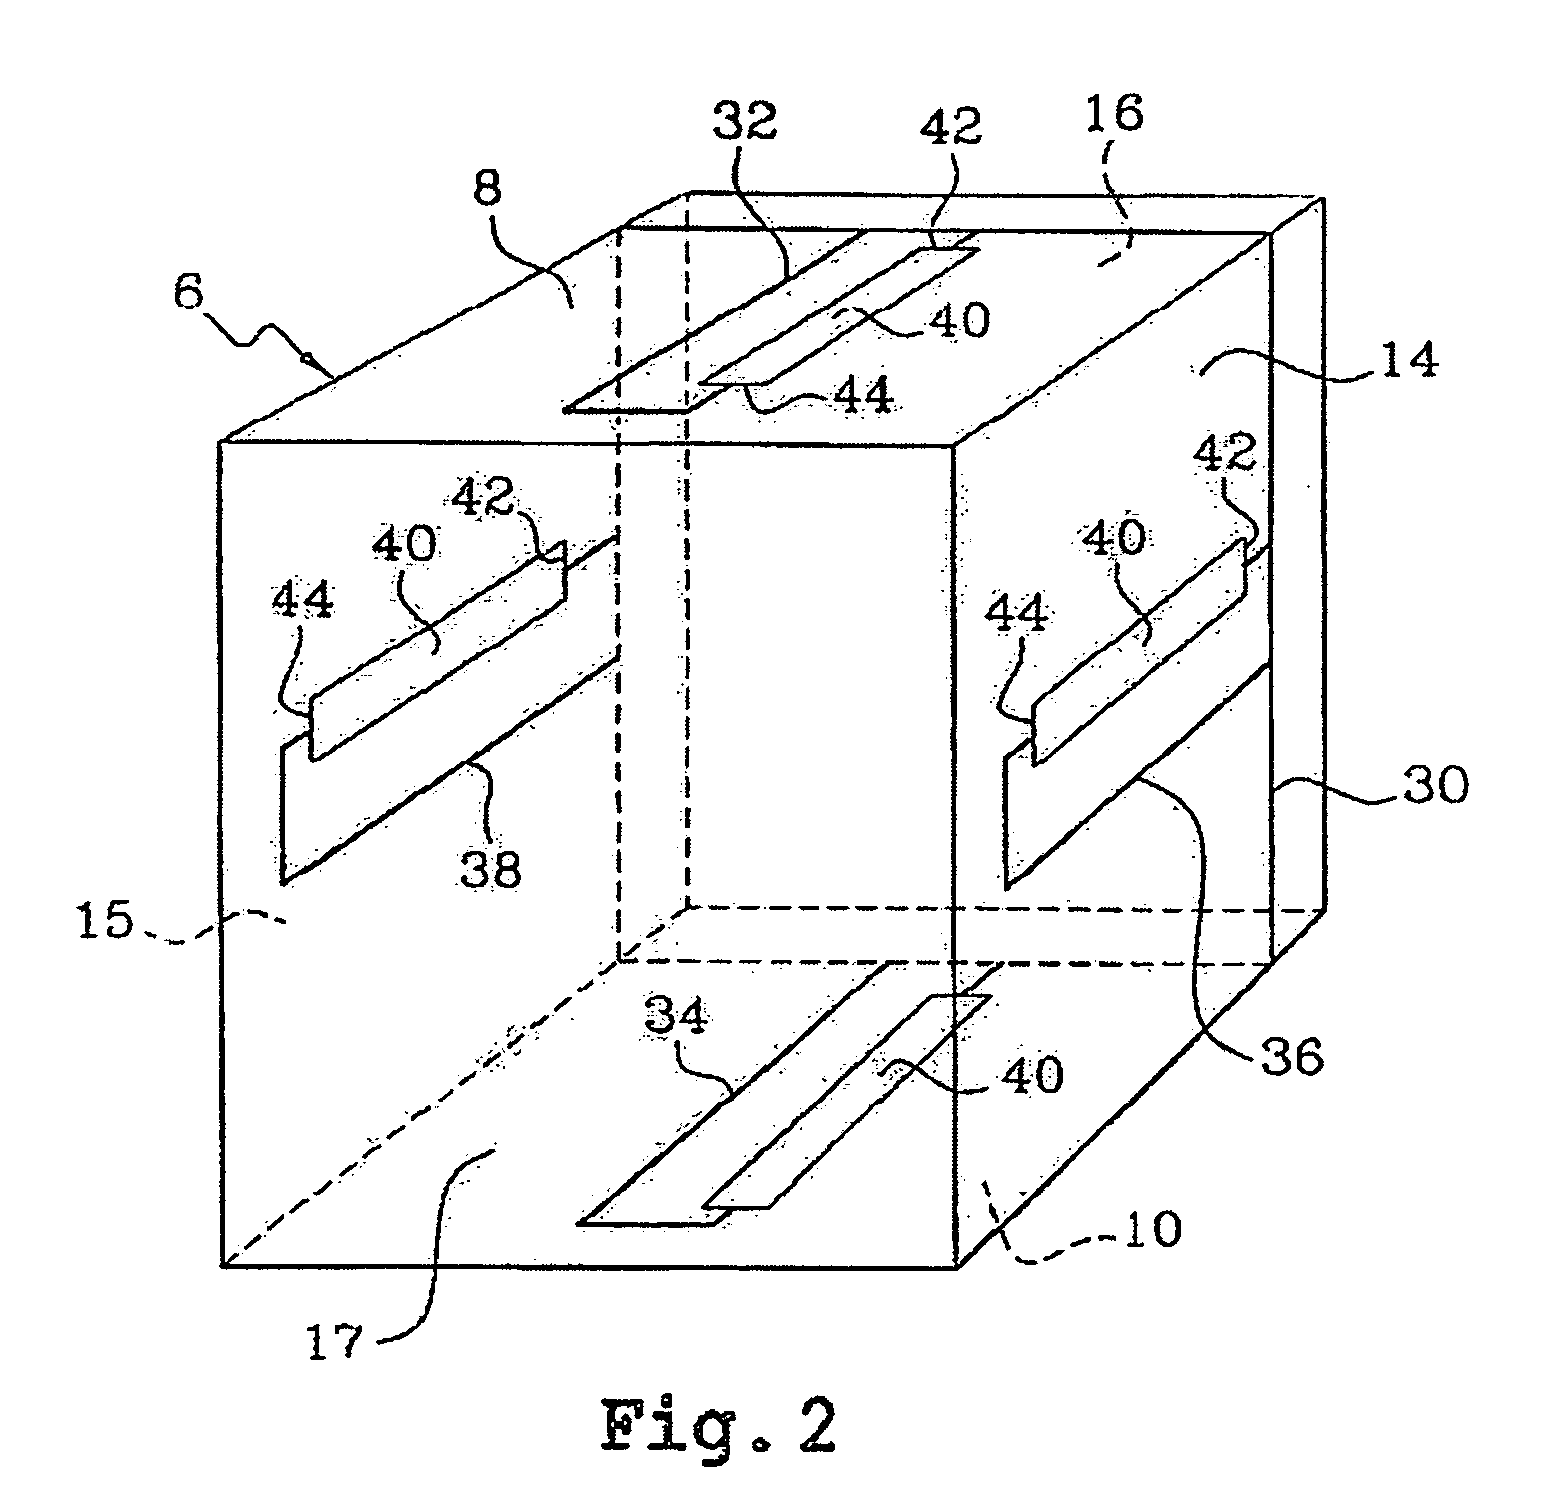 Satellite comprising means for transferring heat from a shelf supporting equipment to radiator panels